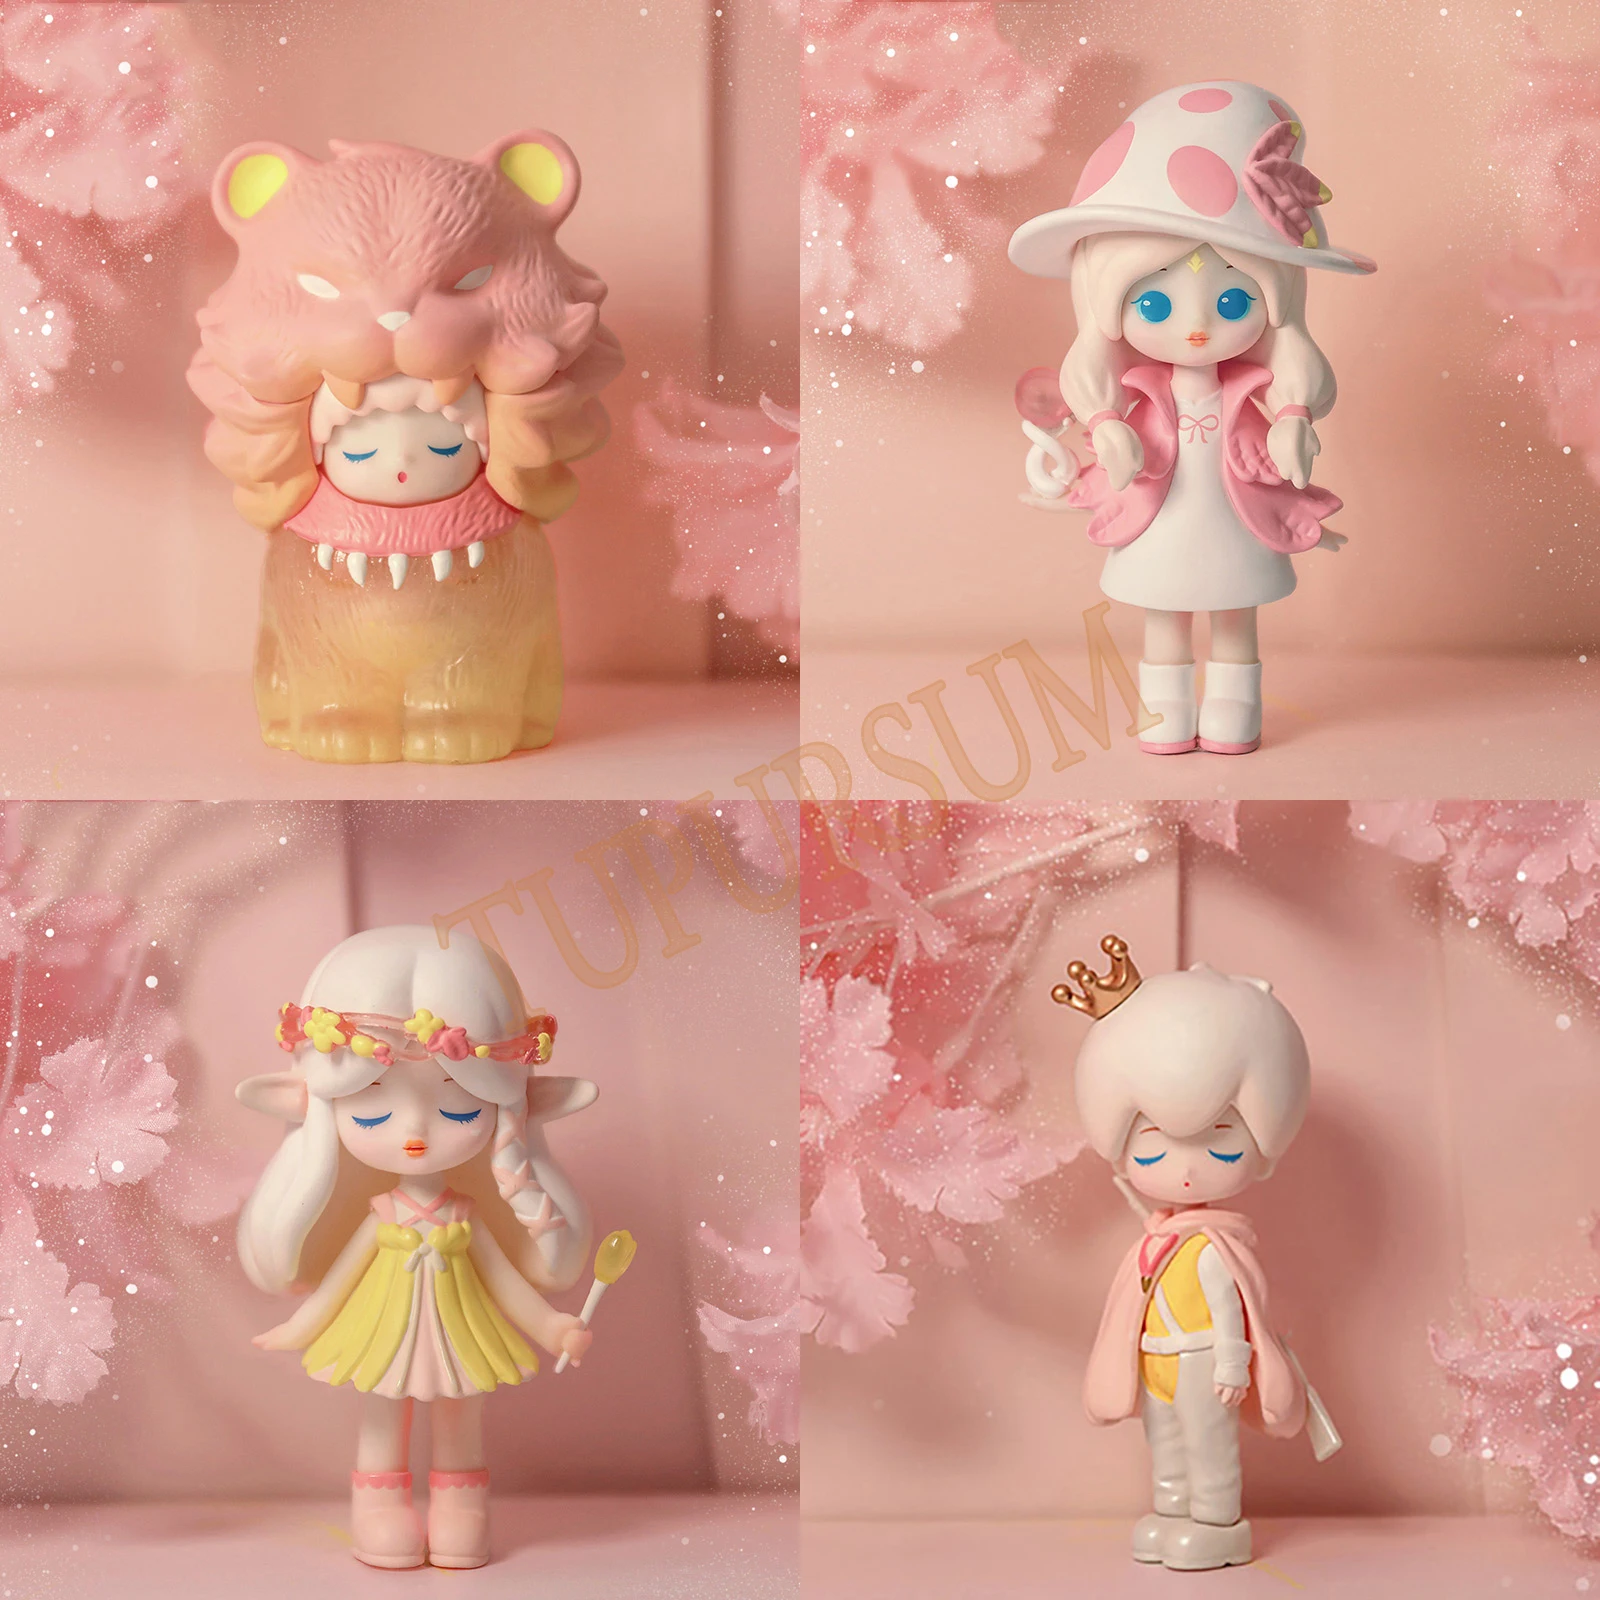 

Liila Misty Forest Blind Box Toys Anime Figure Full Set Guess Bag Summer Love Limited Series Kawaii Doll Model Surprise Gifts